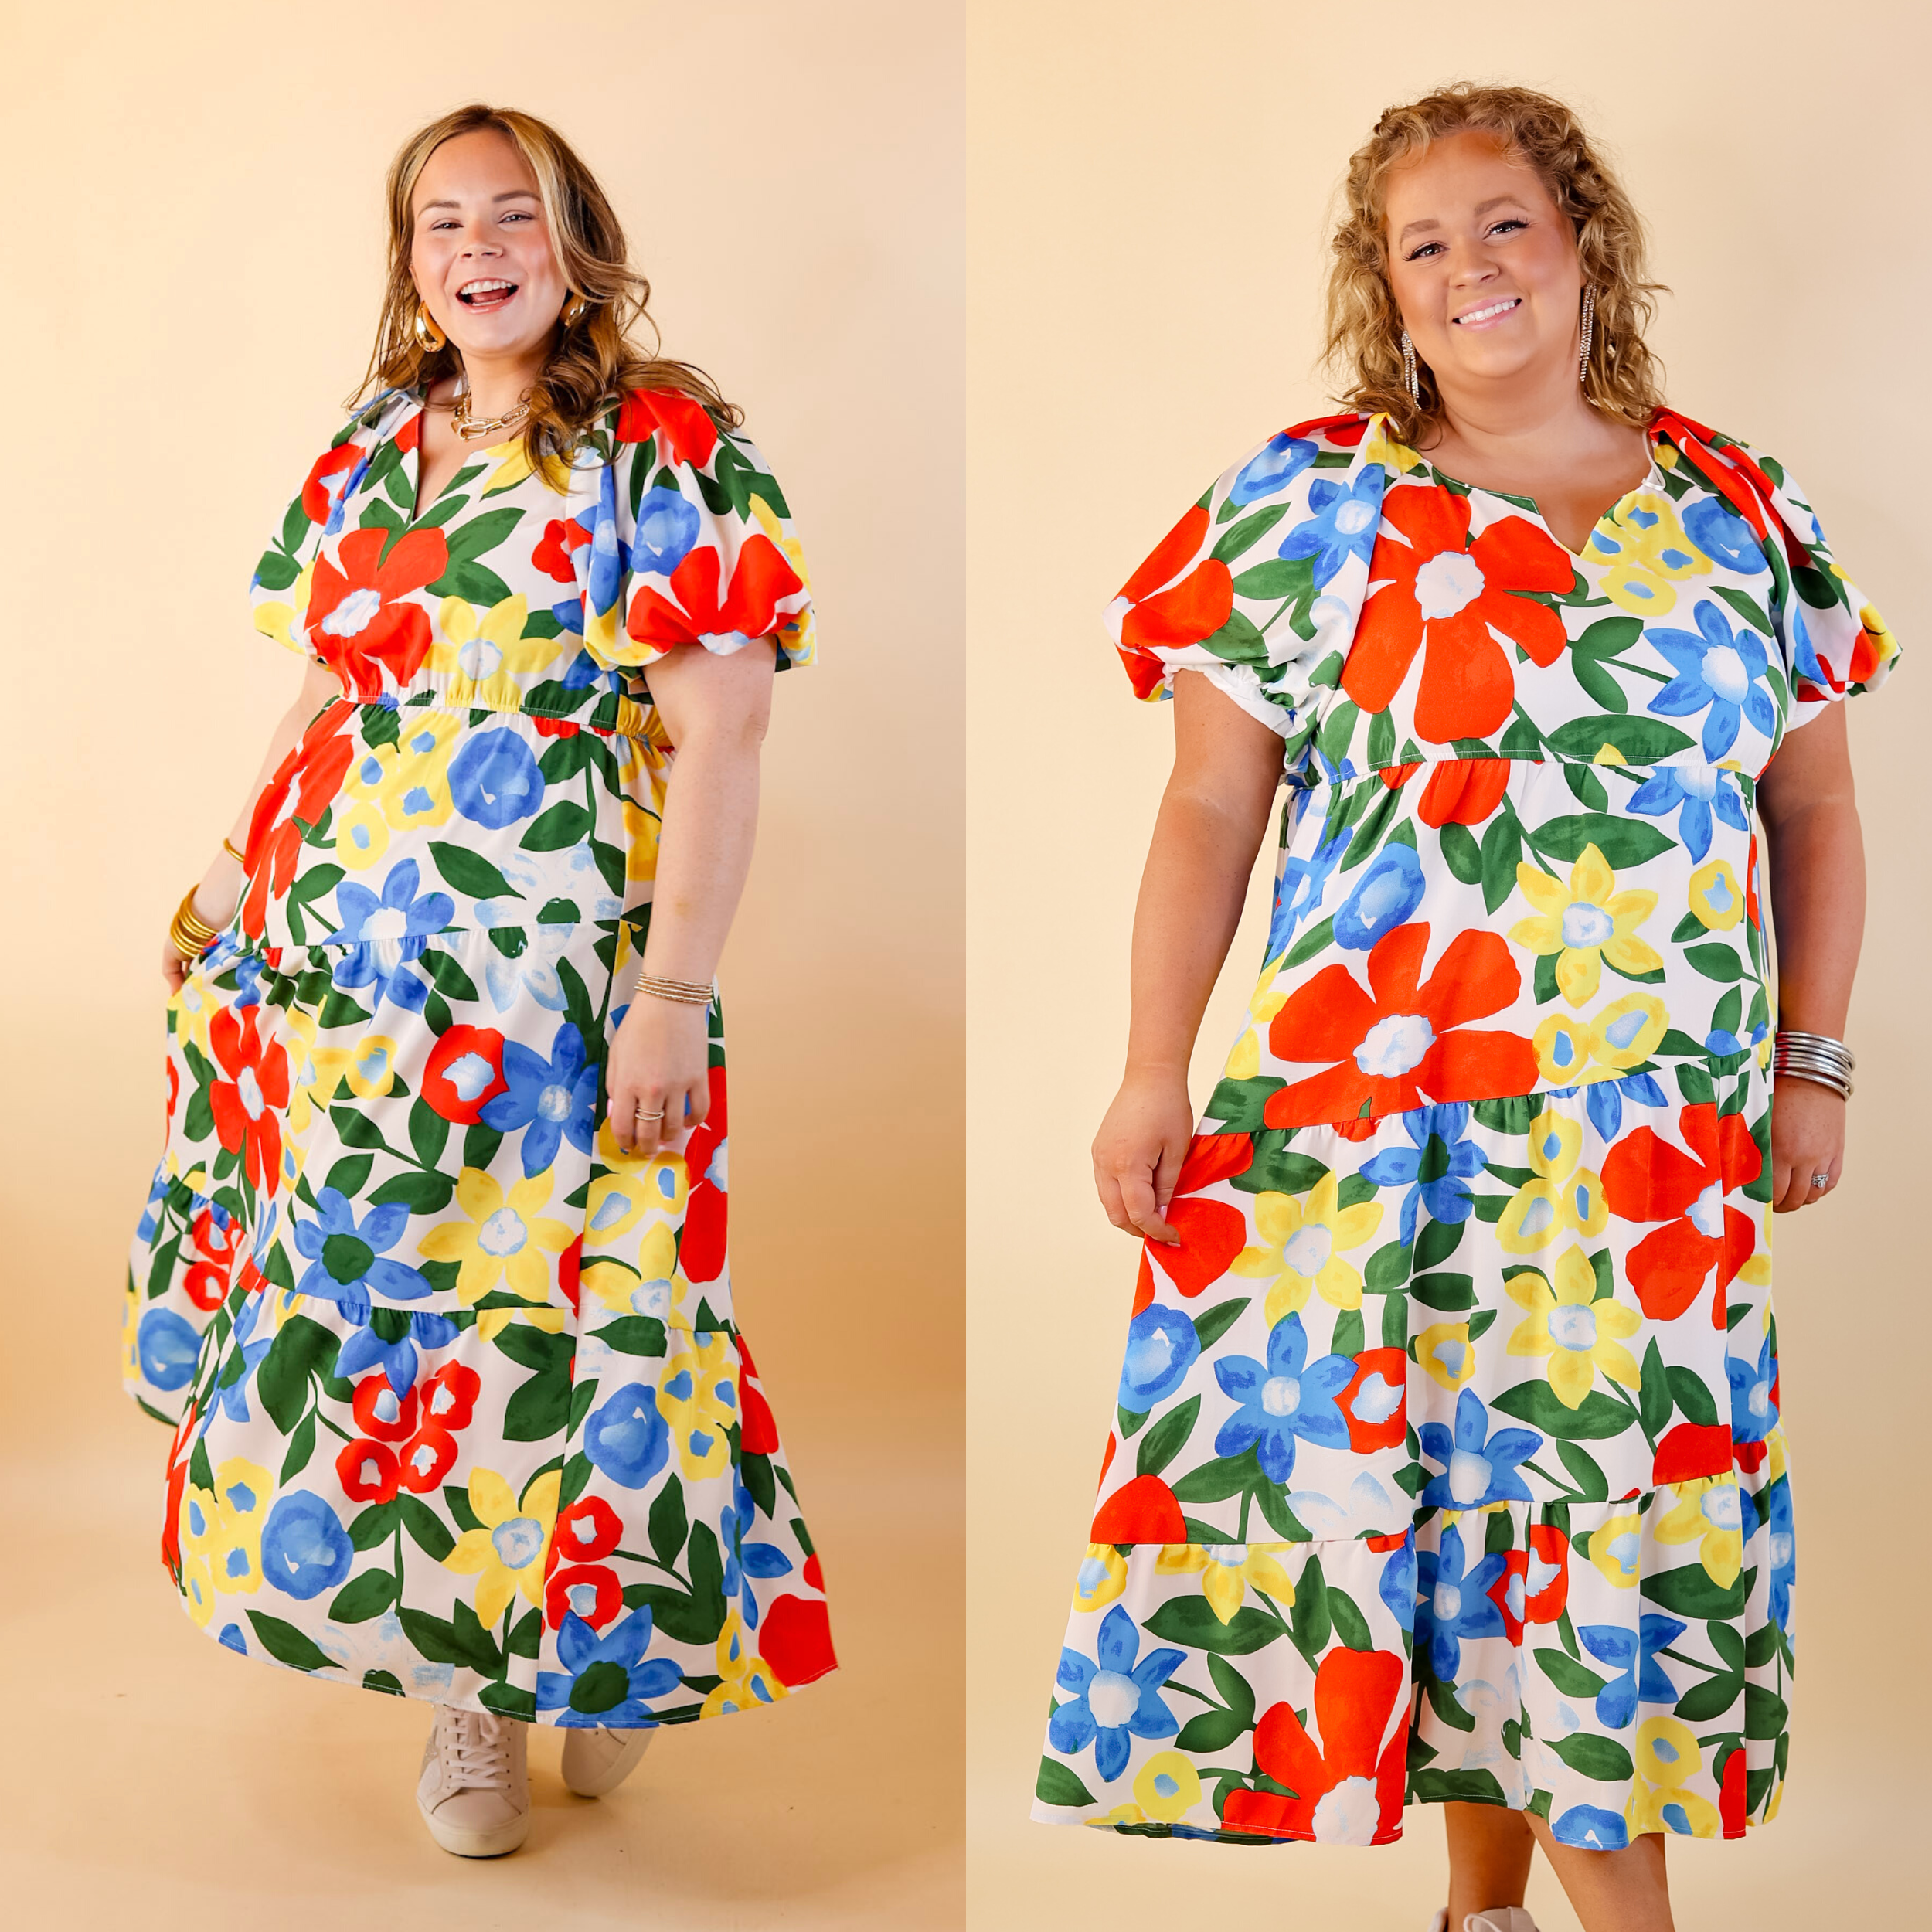 Gramercy Garden Floral Midi Dress with Short Balloon Sleeves in White - Giddy Up Glamour Boutique